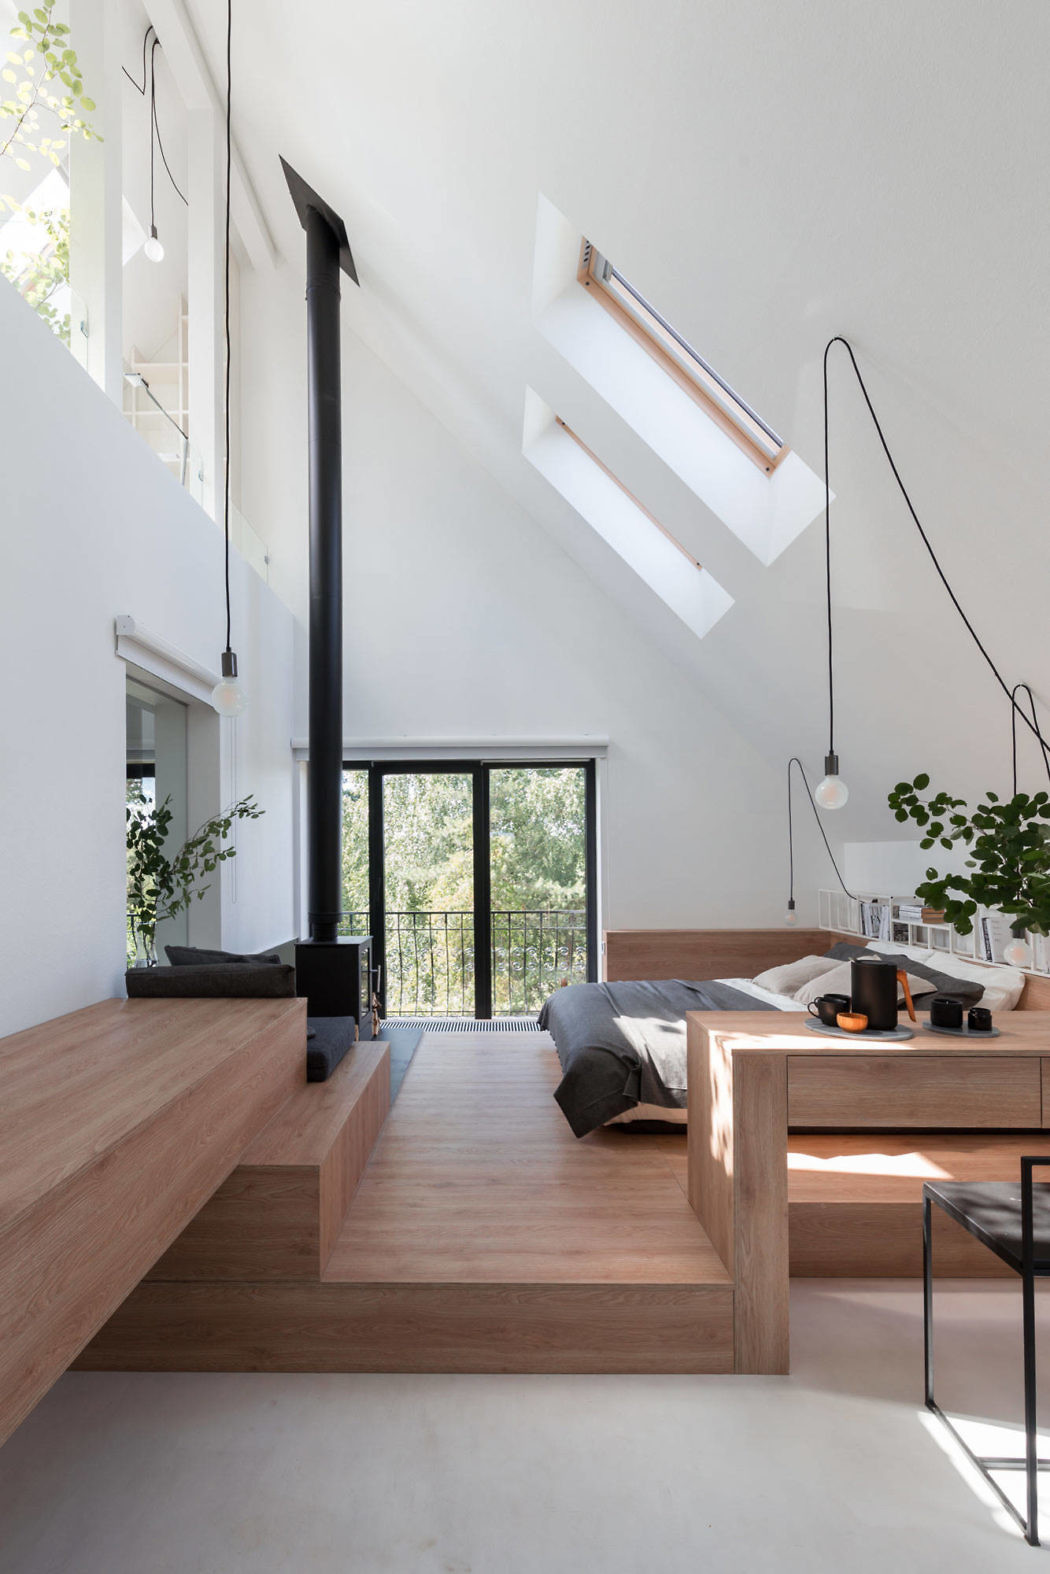 Bright, airy interior with high ceilings, wooden accents, and skylights.